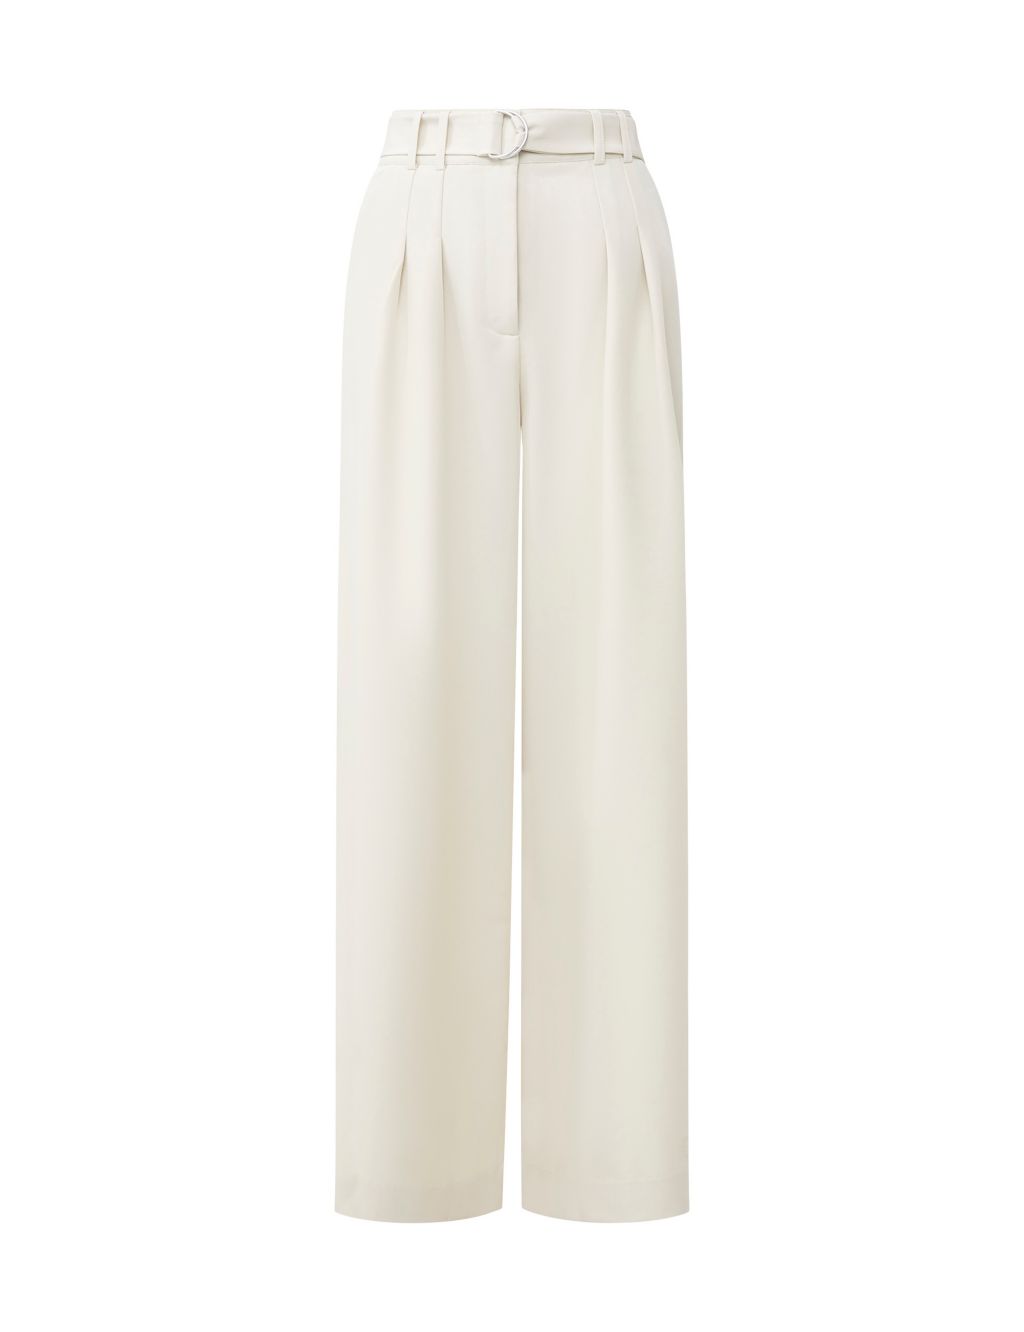 Belted Wide Leg Trousers image 2